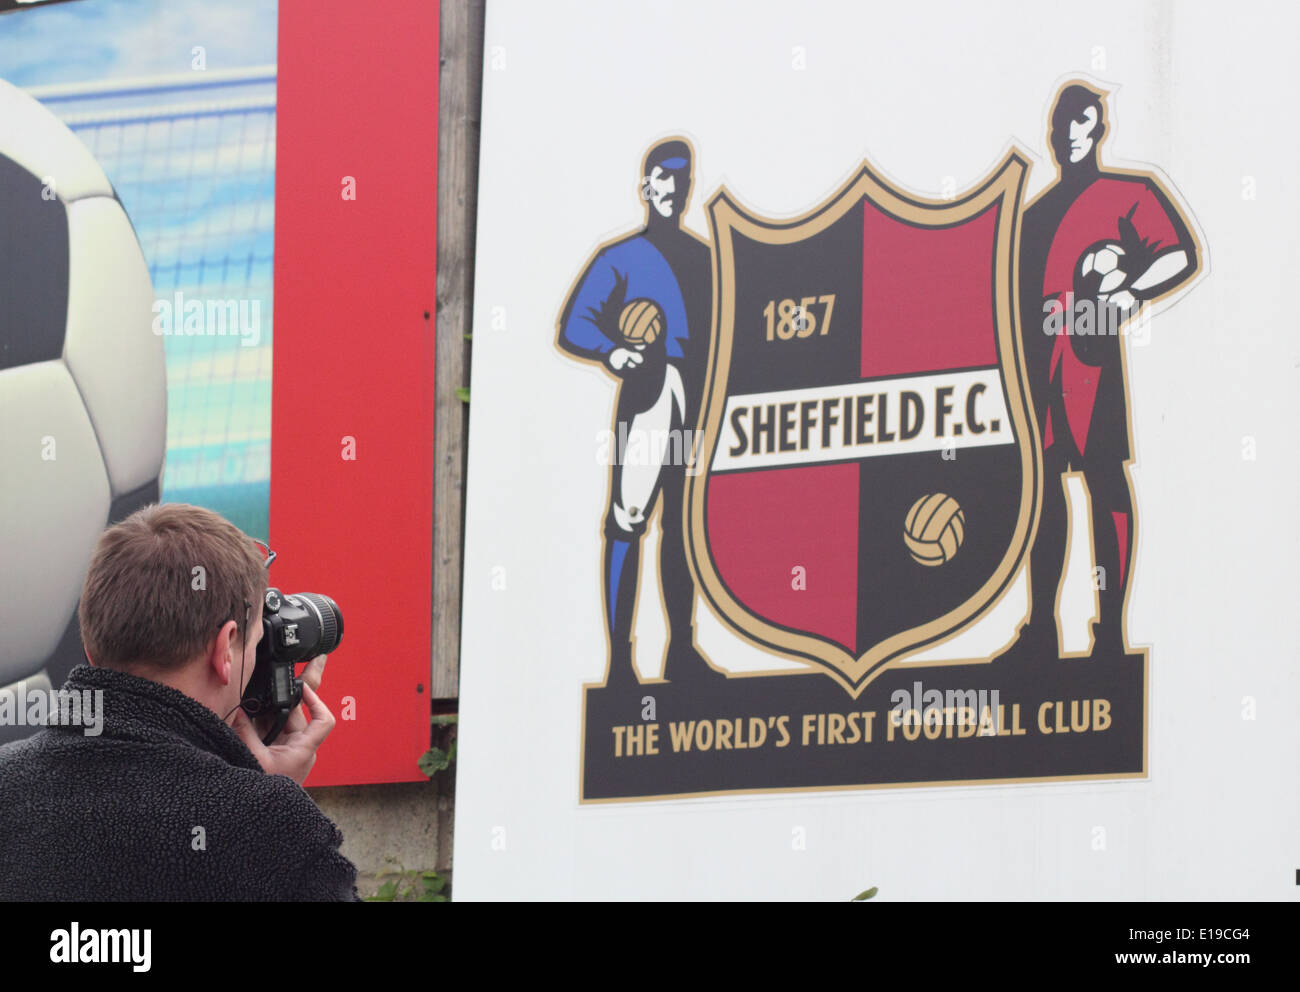 A man photographs the logo of  Sheffield Football Club; the world's first football club at it's ground, England UK. Stock Photo